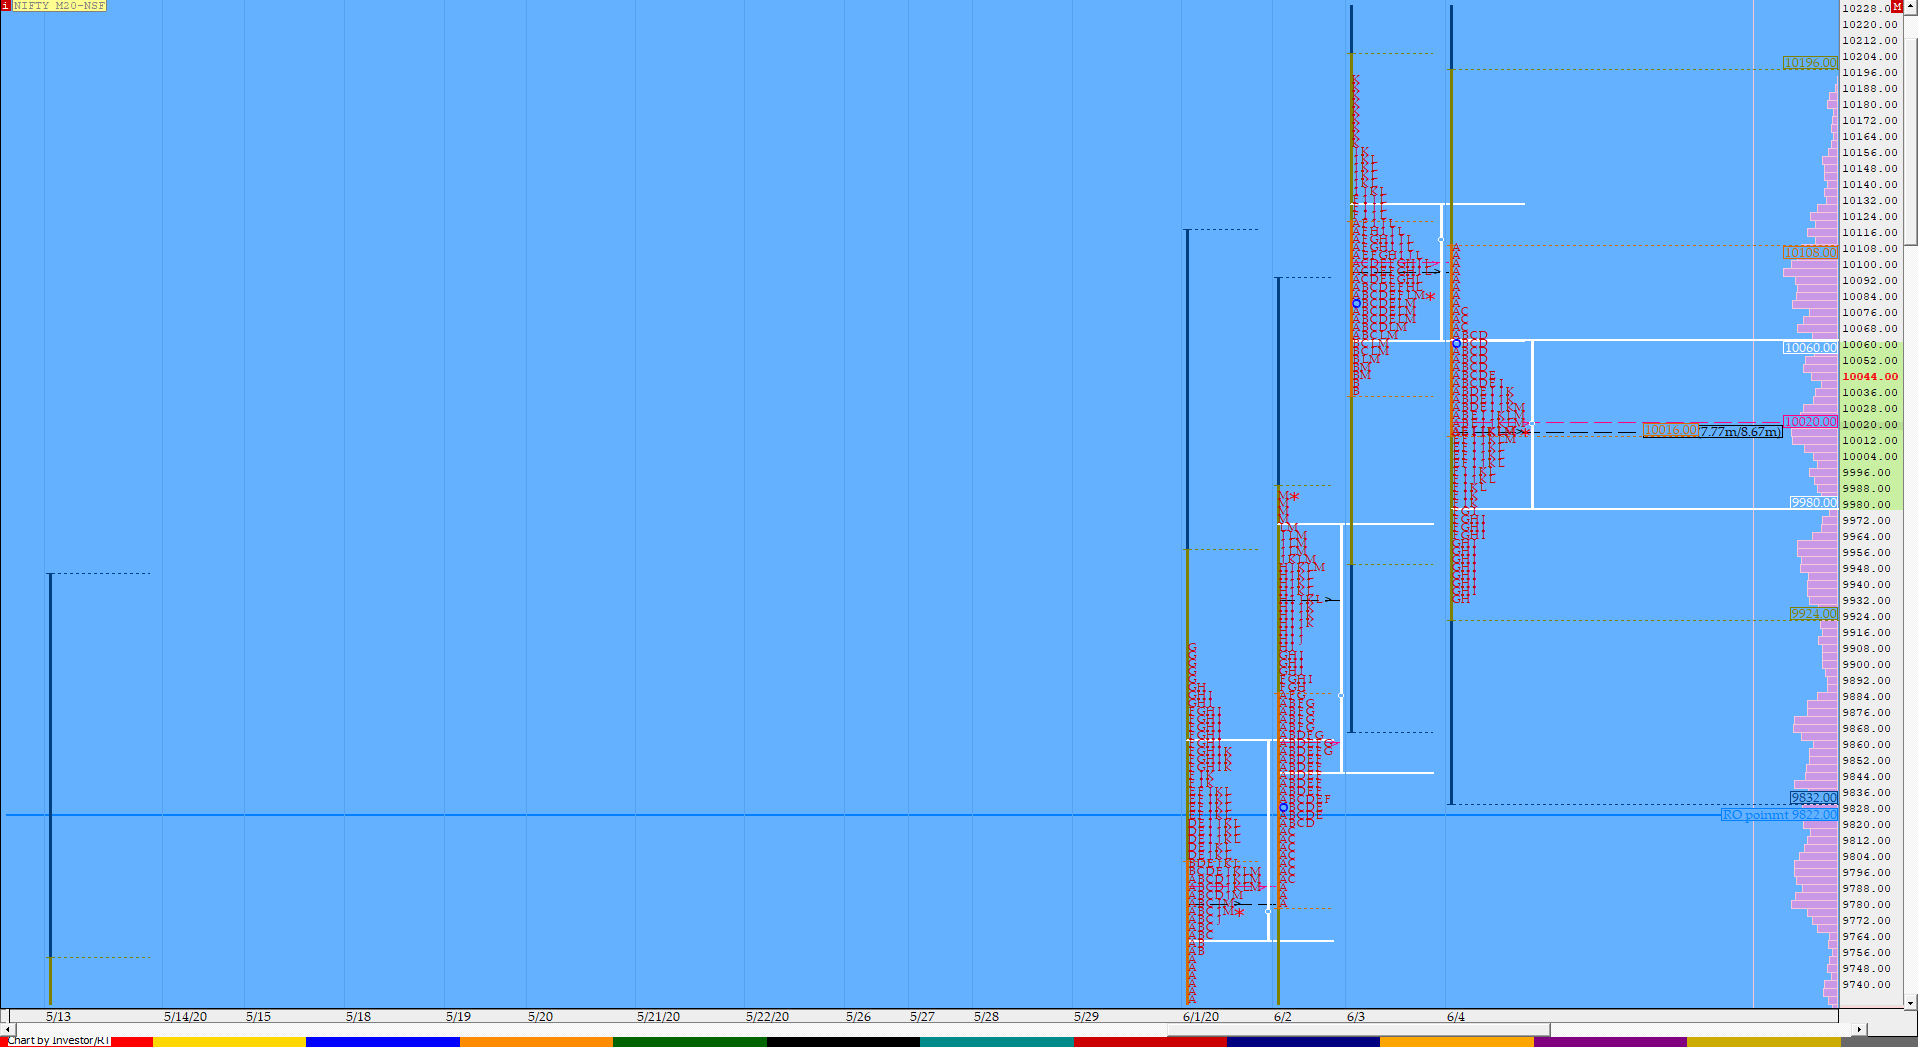 Nf Compo1 4 Market Profile Analysis Dated 04Th June 2020 Banknifty Futures, Charts, Day Trading, Intraday Trading, Intraday Trading Strategies, Market Profile, Market Profile Trading Strategies, Nifty Futures, Order Flow Analysis, Support And Resistance, Technical Analysis, Trading Strategies, Volume Profile Trading